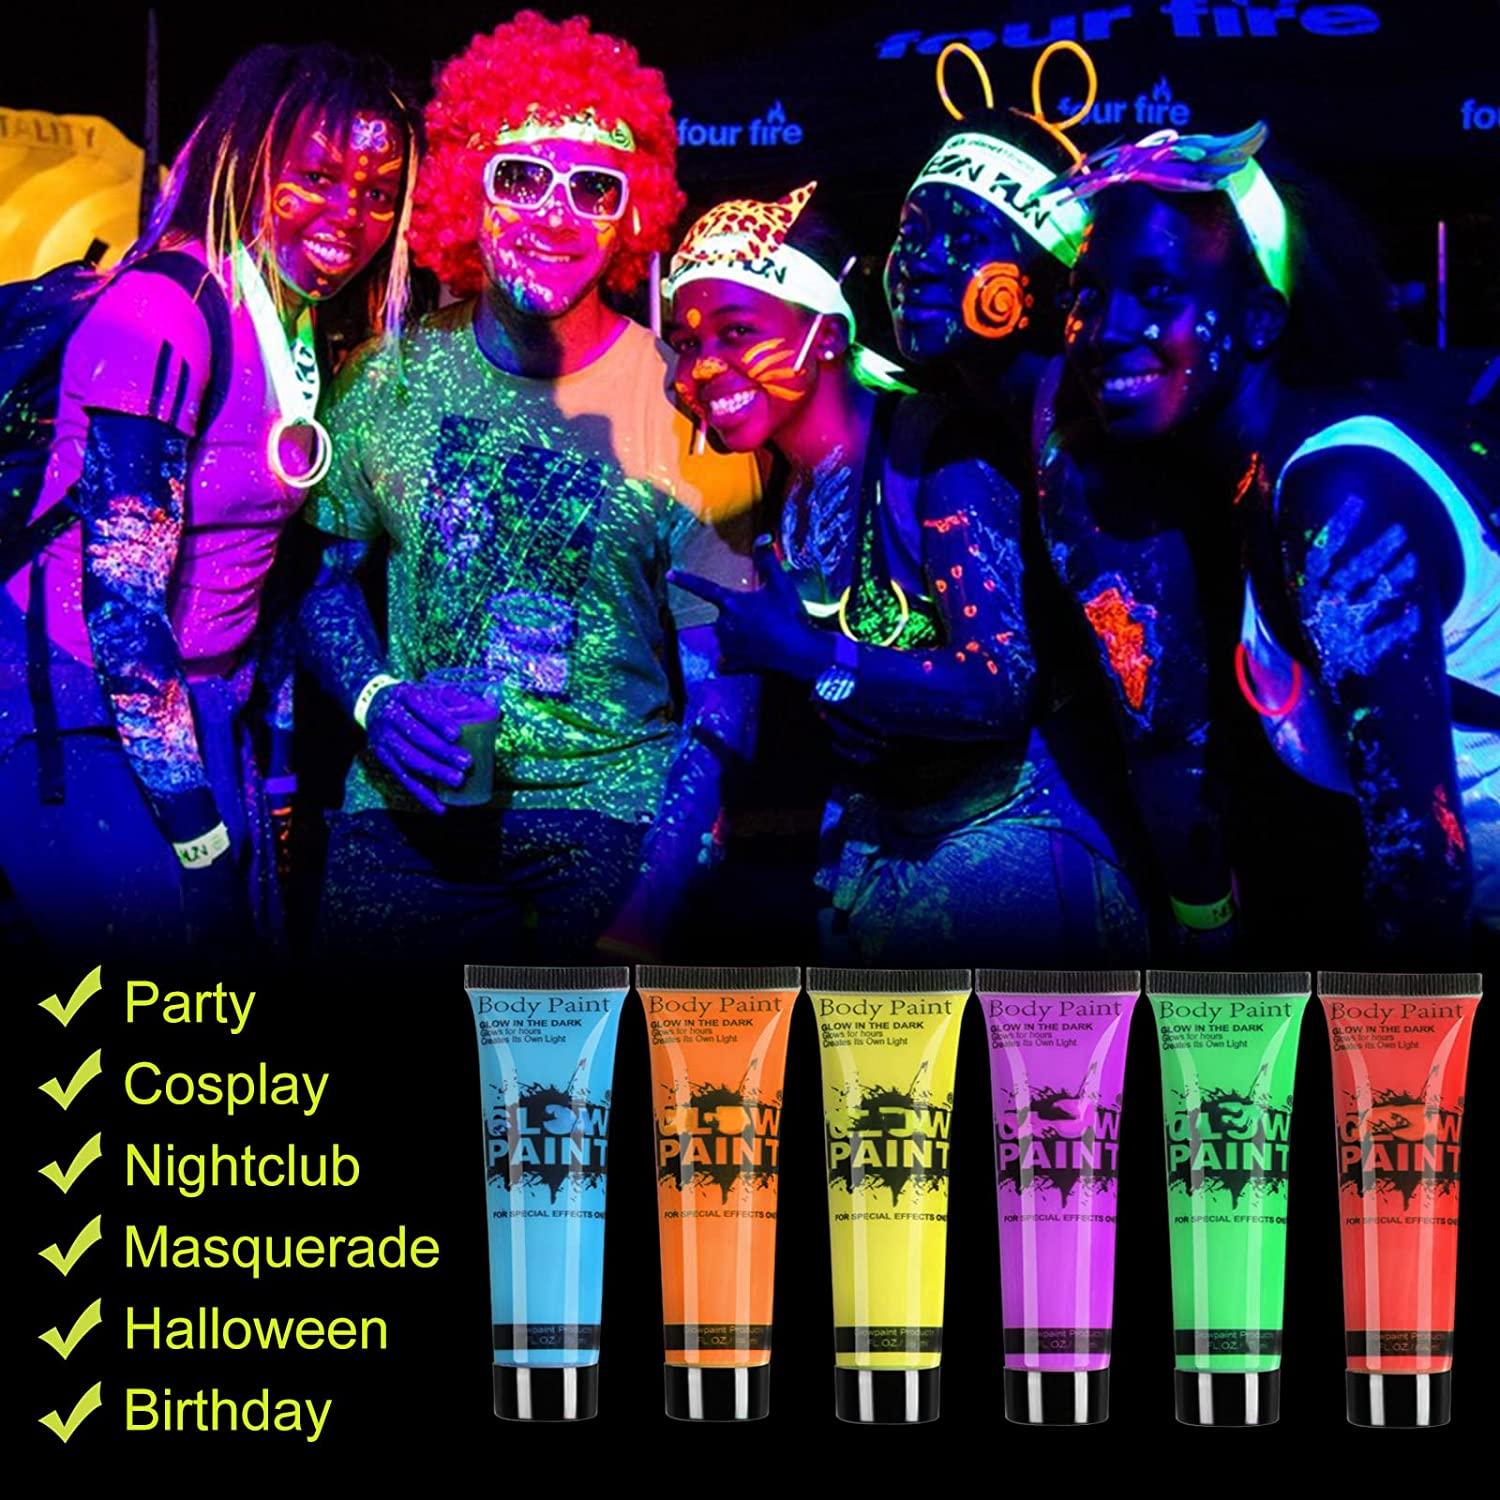 UV Glow Blacklight Face and Body Paint 0.34oz - Set of 6 Tubes - Neon Fluorescent